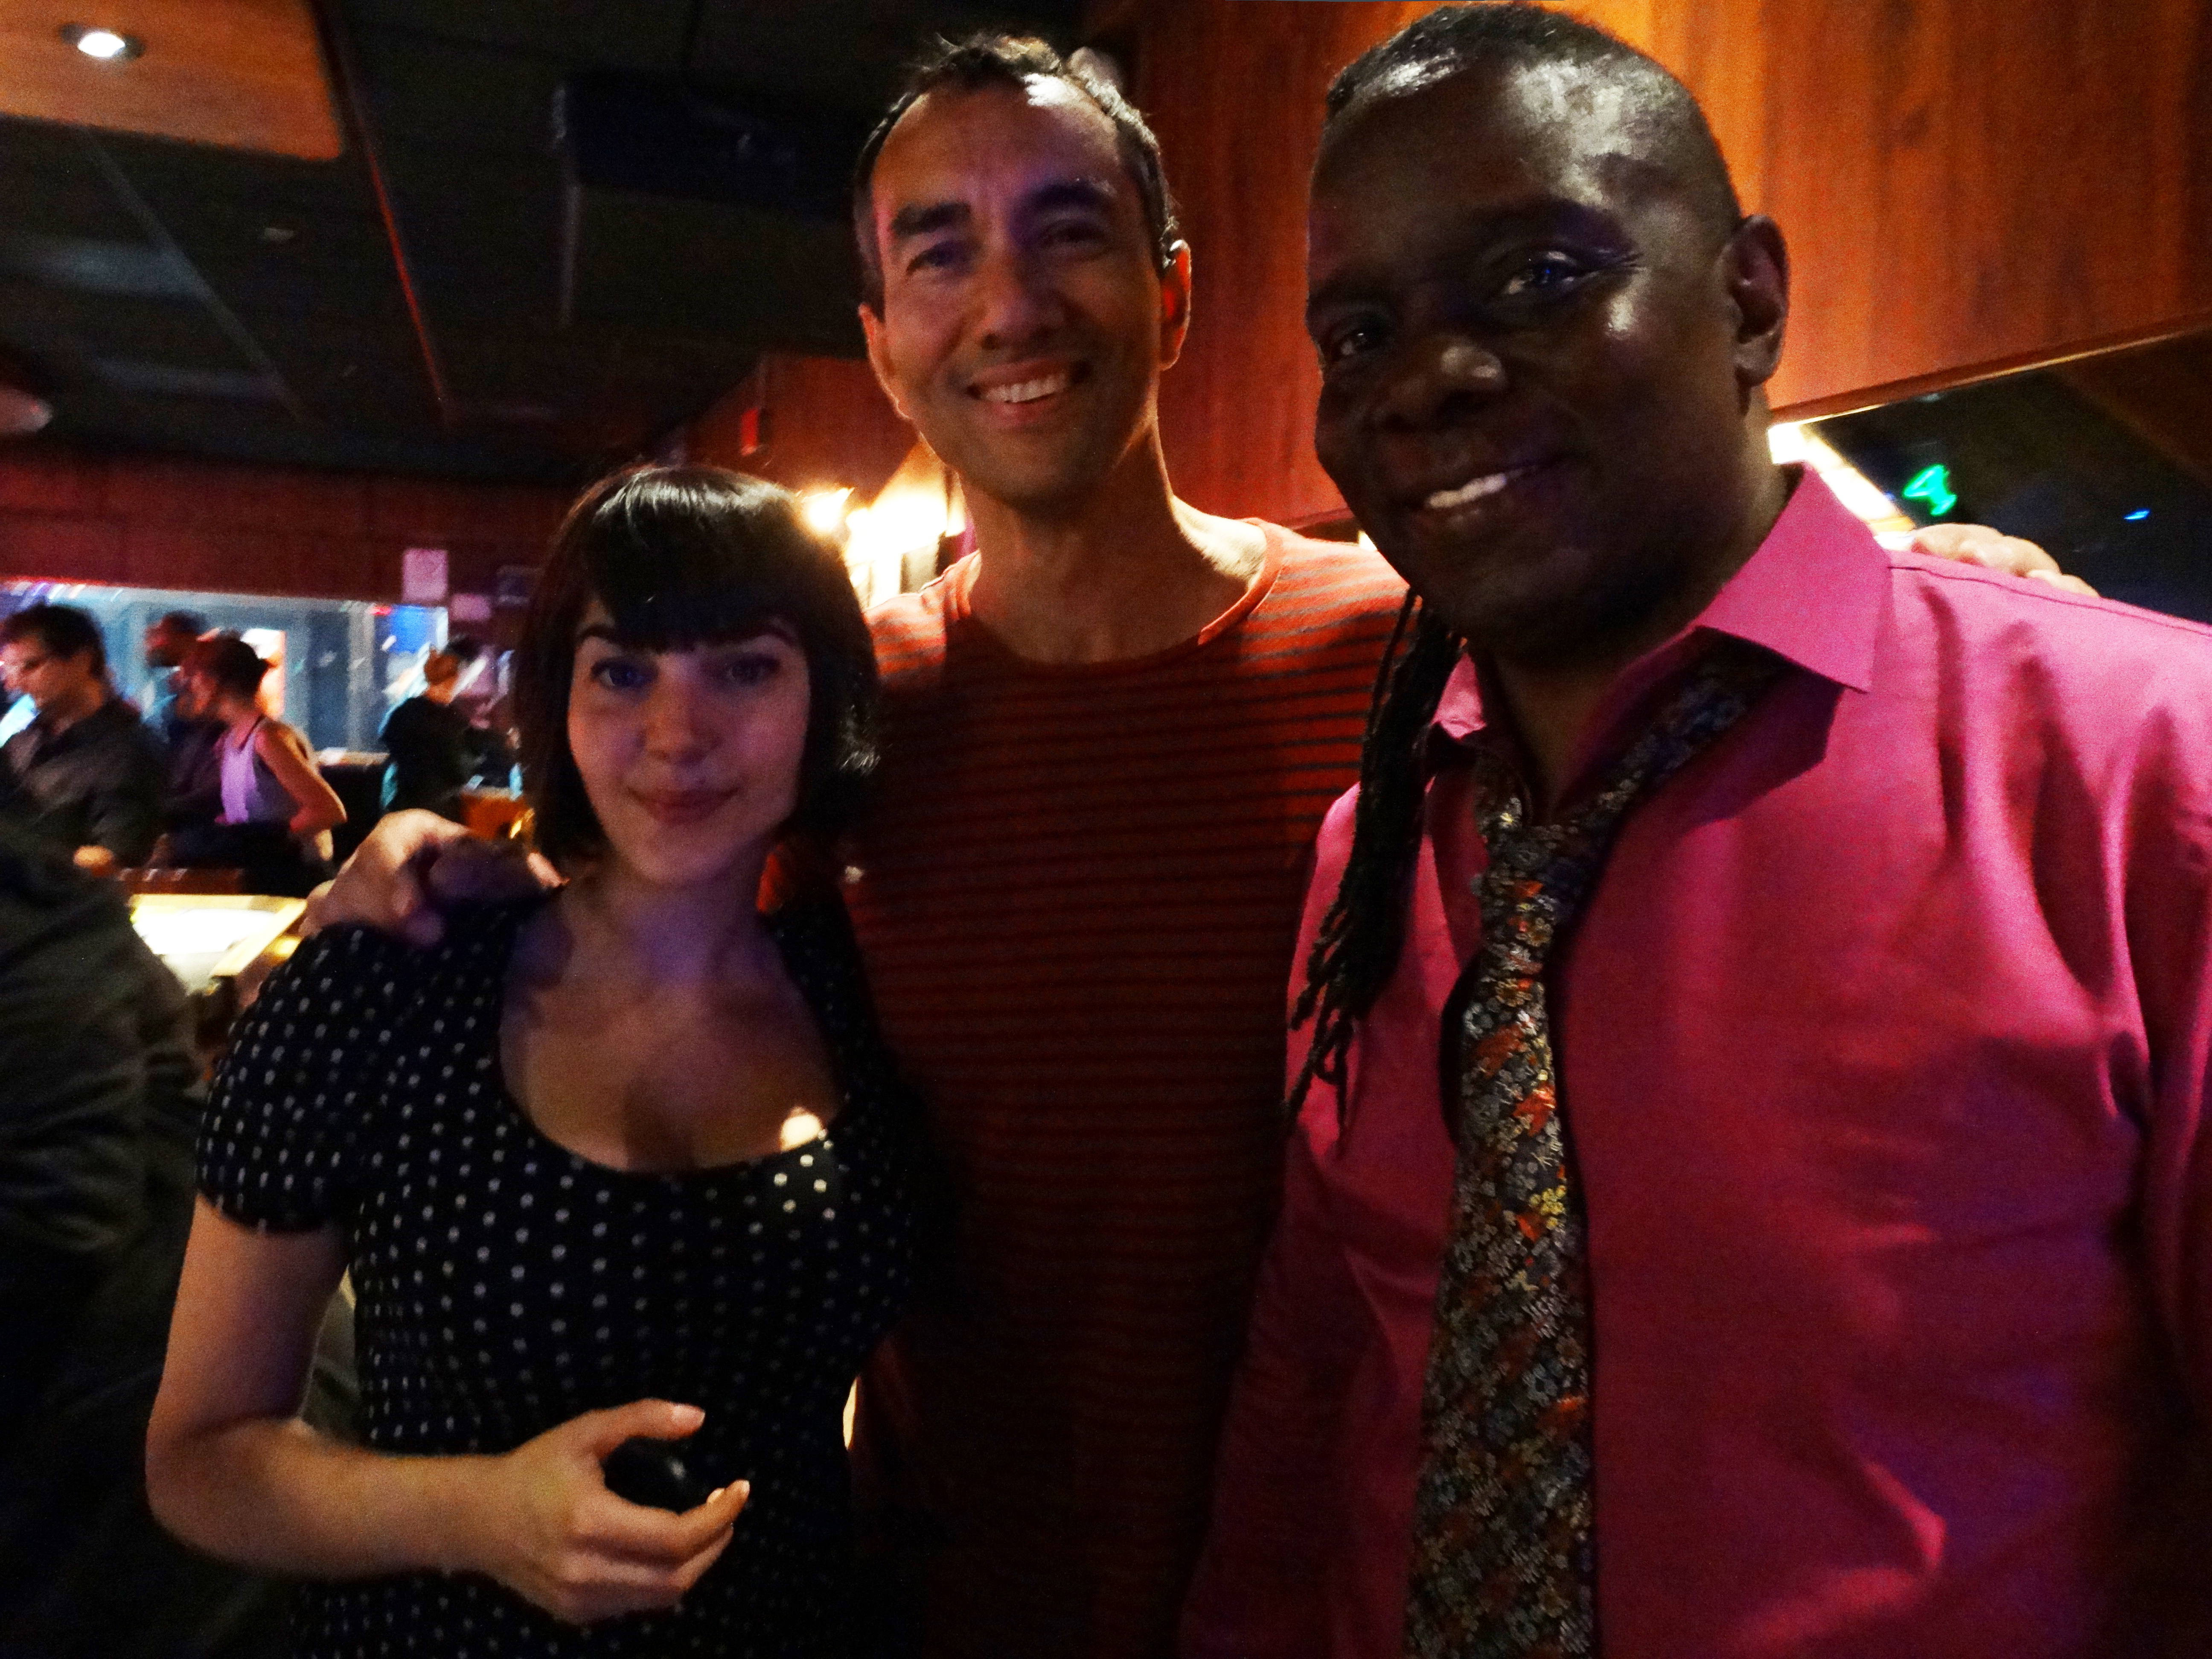 Here with Christina Krati and 6 time Grammy Award winner of Earth Wind & Fire fame Philip Bailey at the Blue Note in NYC